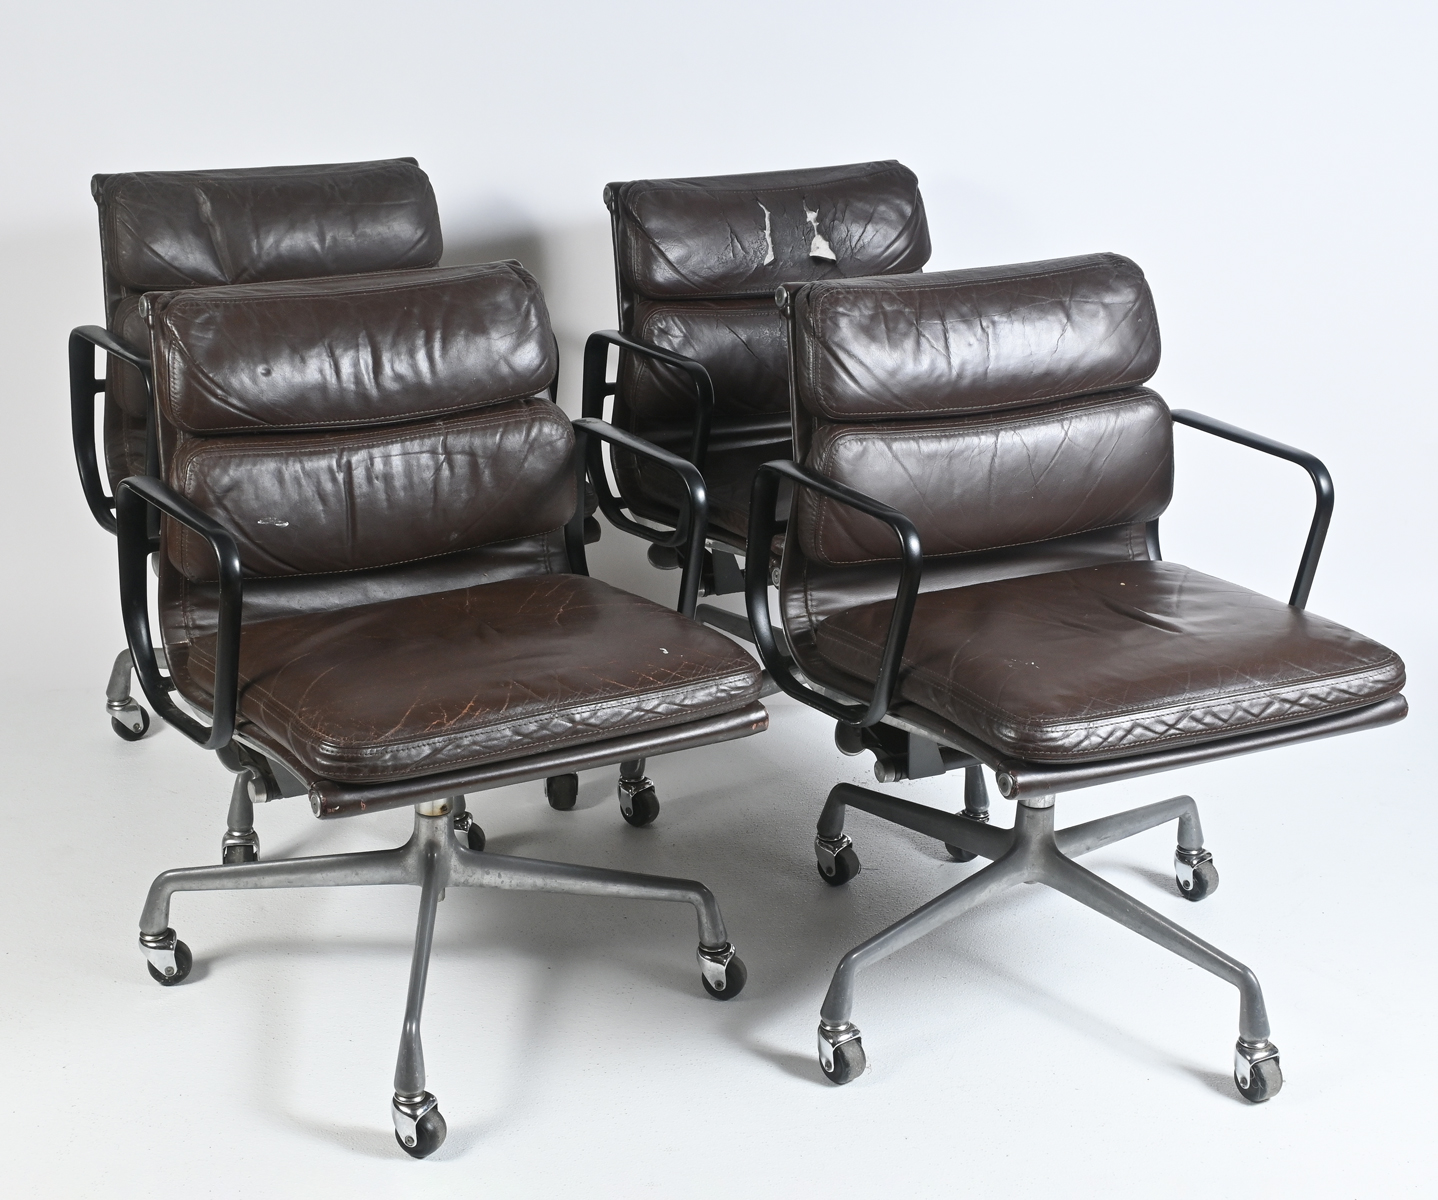 4 EAMES MODERN OFFICE CHAIRS: Four